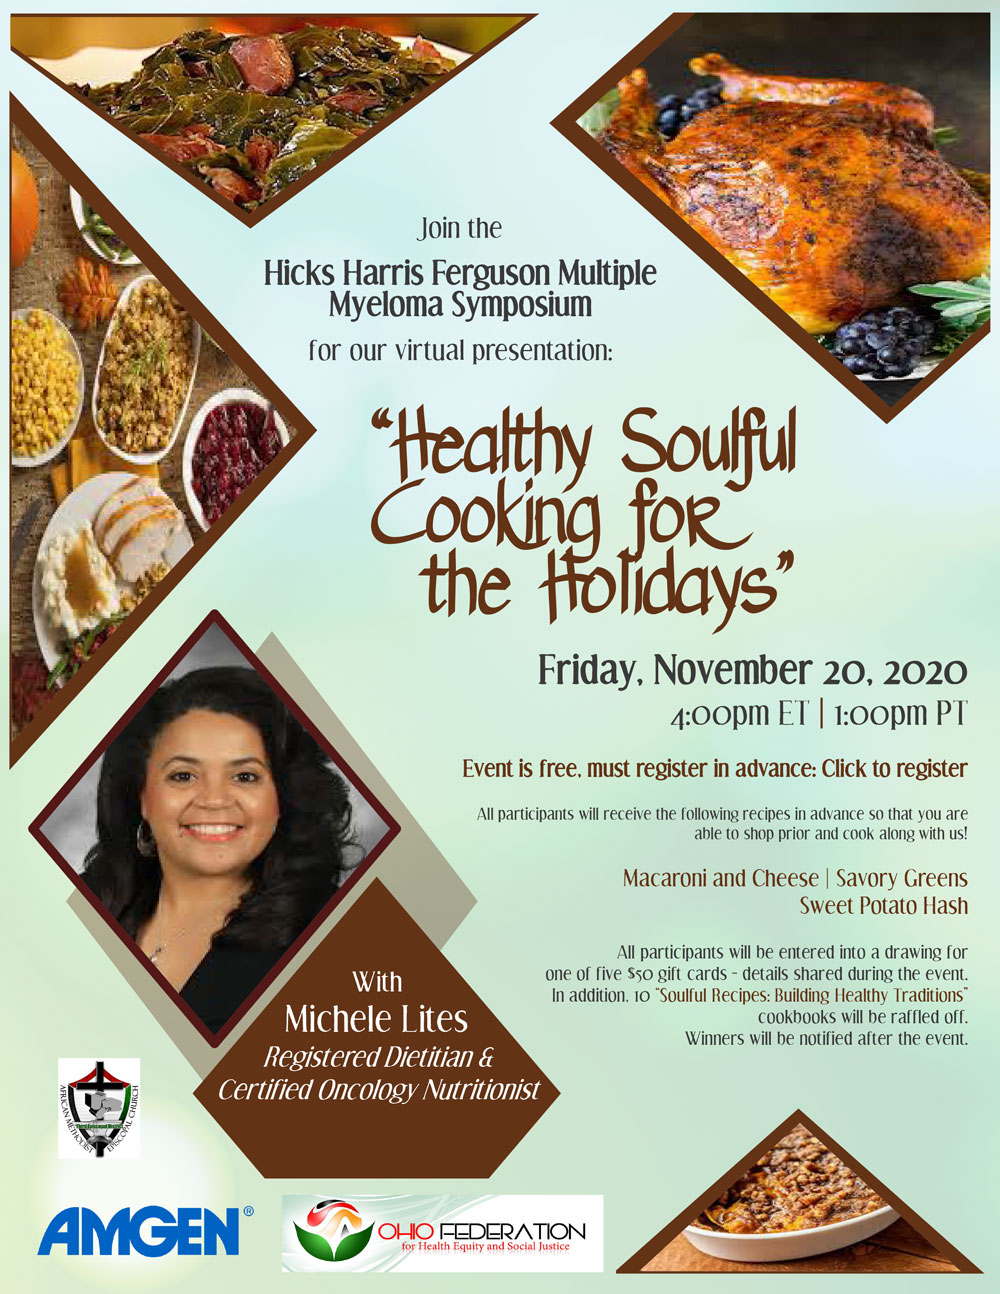 Healthy Soulful Cooking for the Holiday